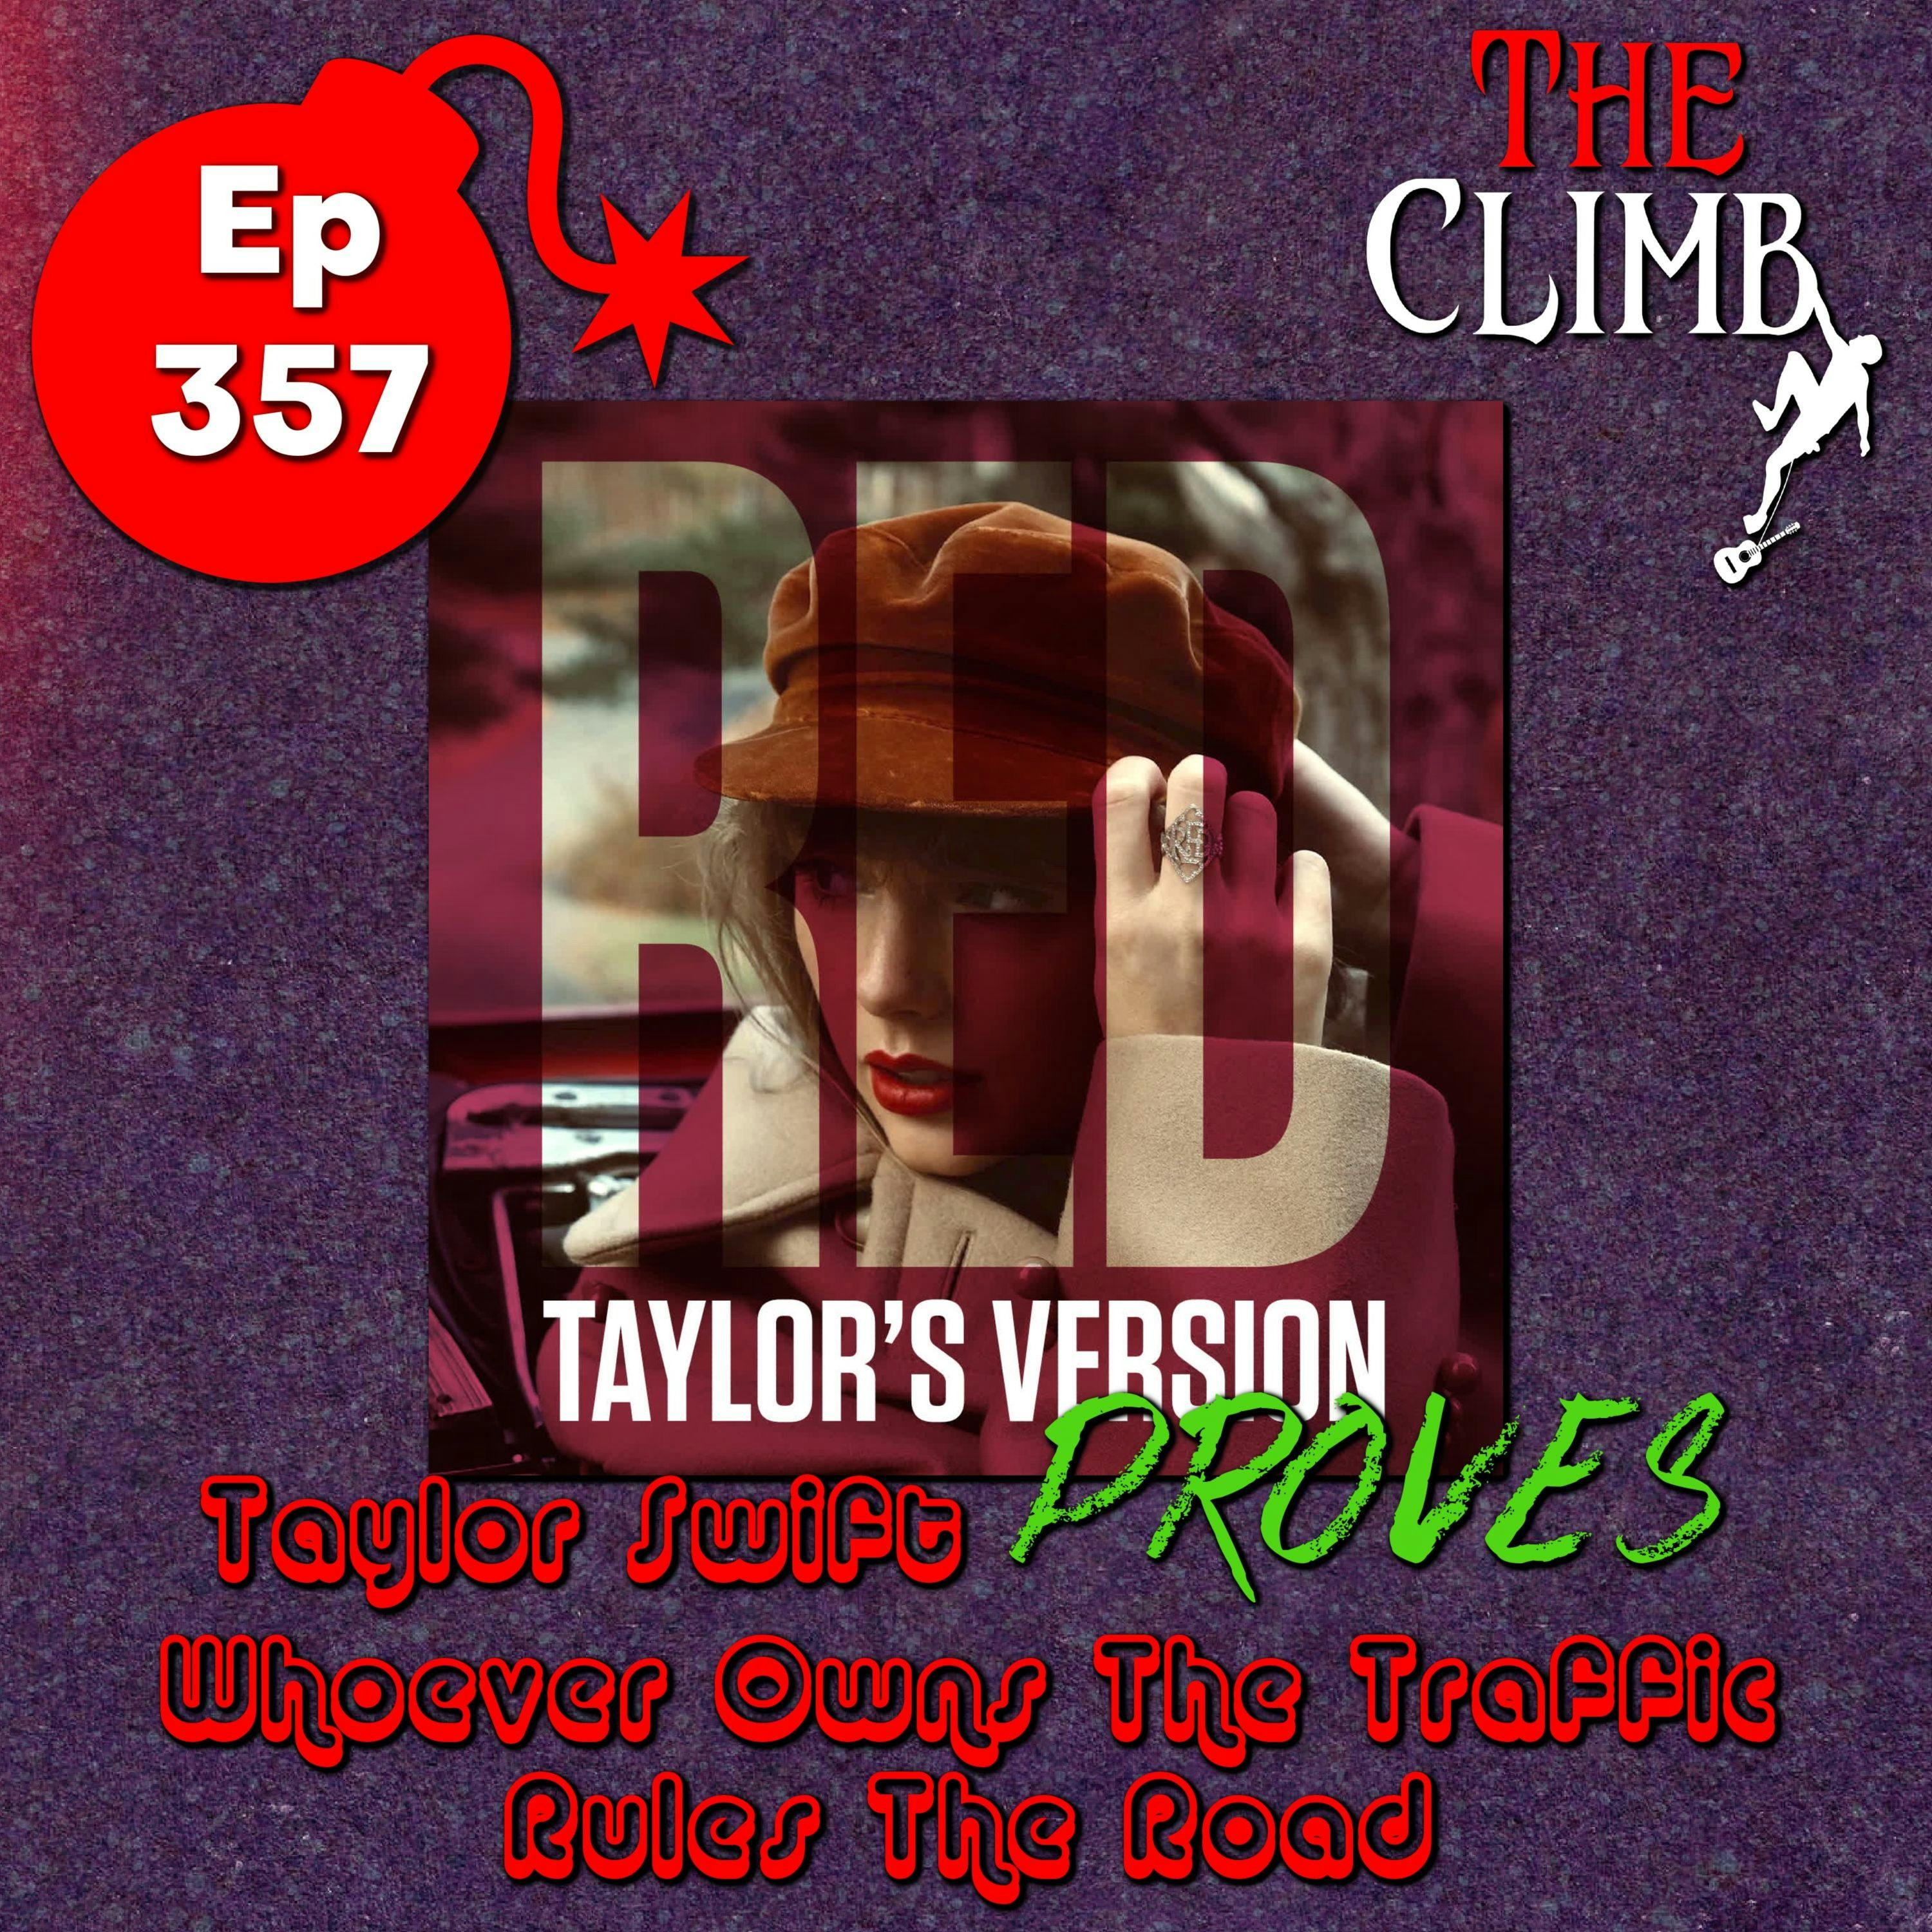 Ep 358: Taylor Swift PROVES Whomever Owns The Traffic Rules The Road!